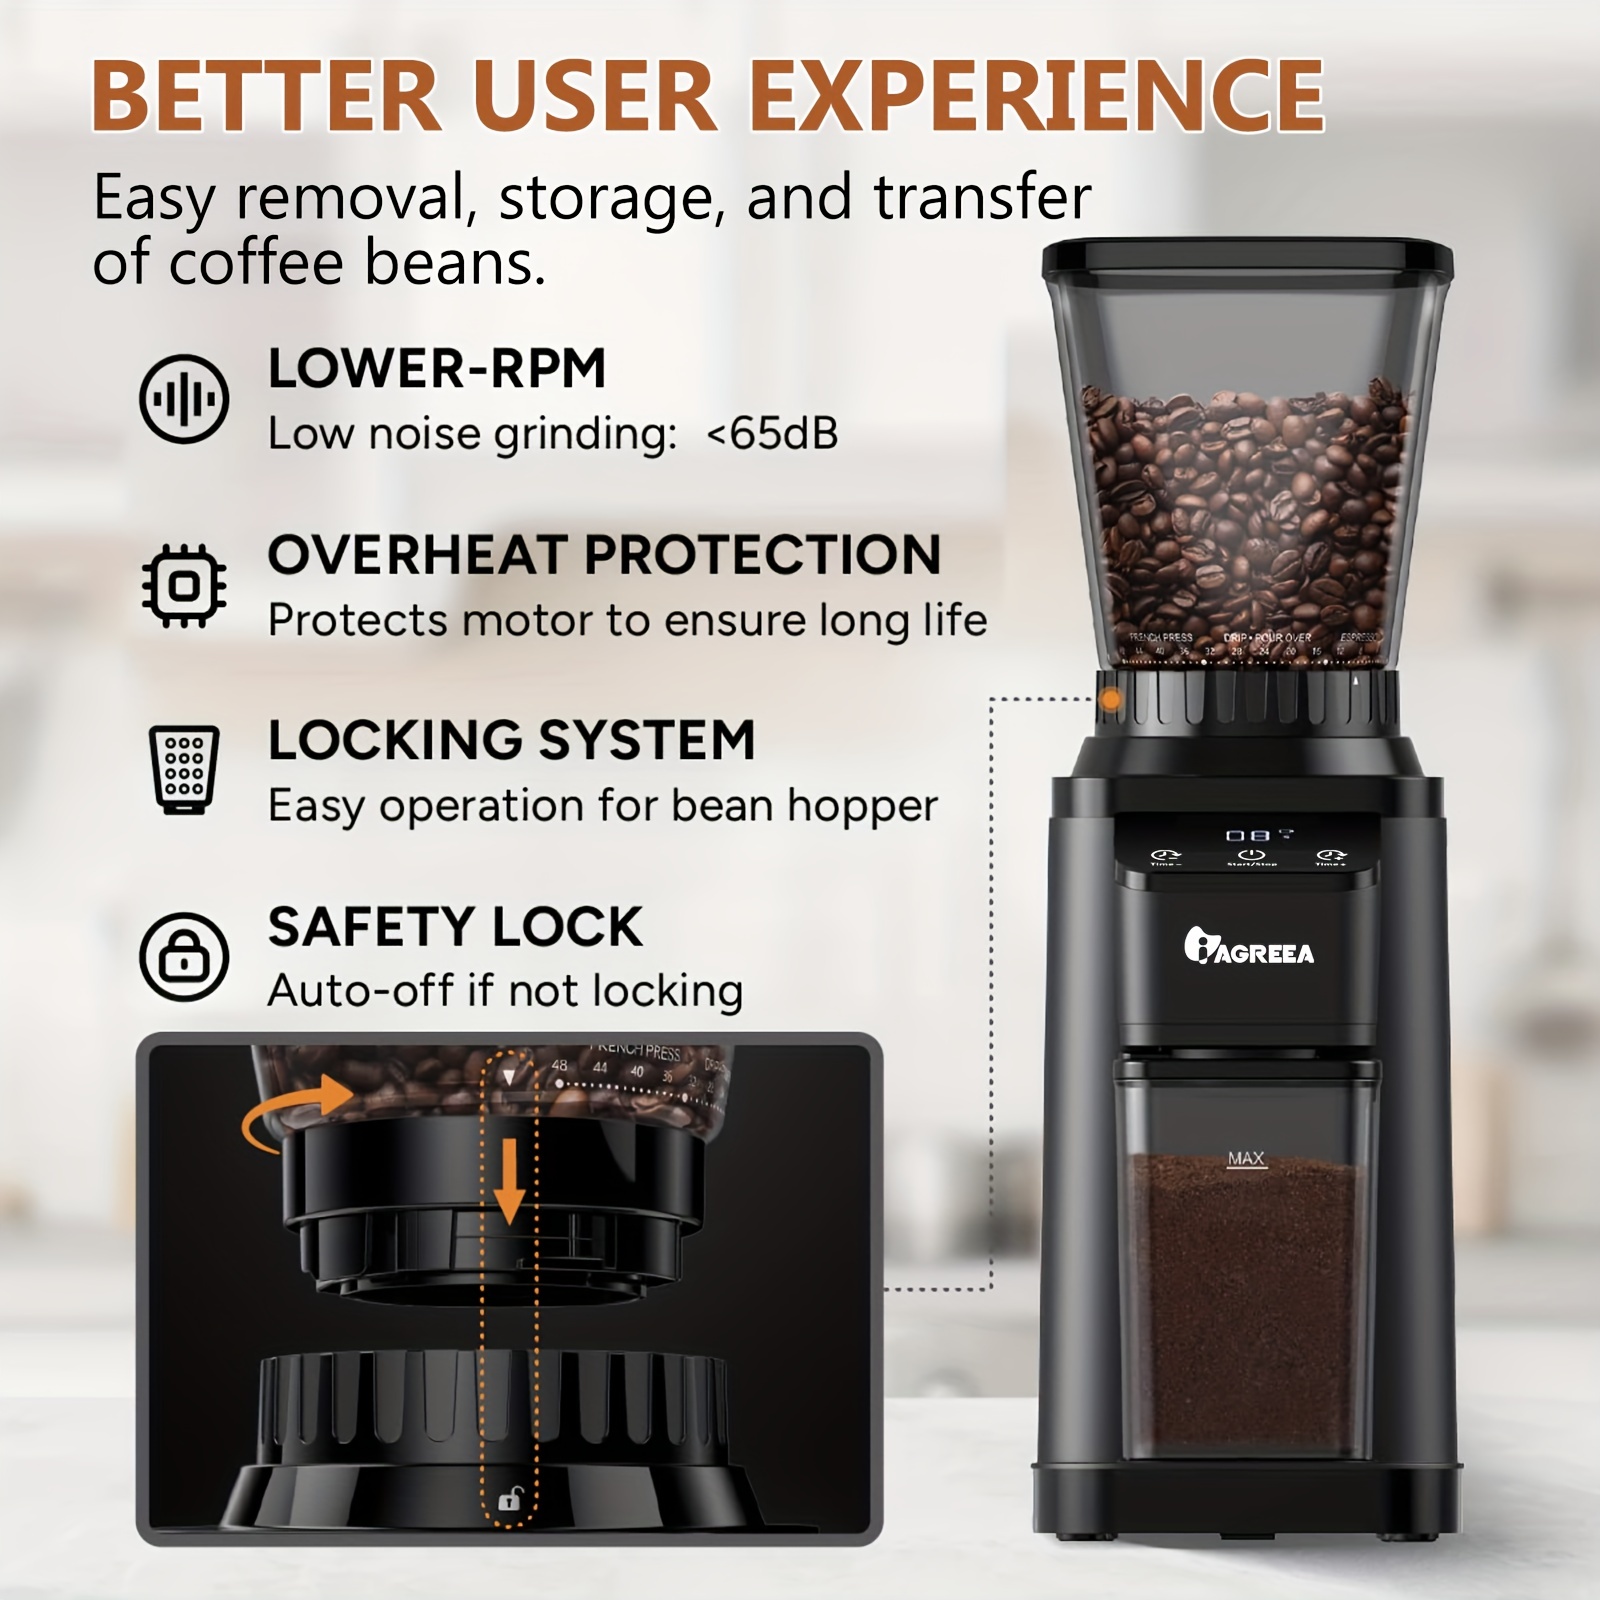 Iagreea Coffee Grinder, With 48 Precise Grinding Settings